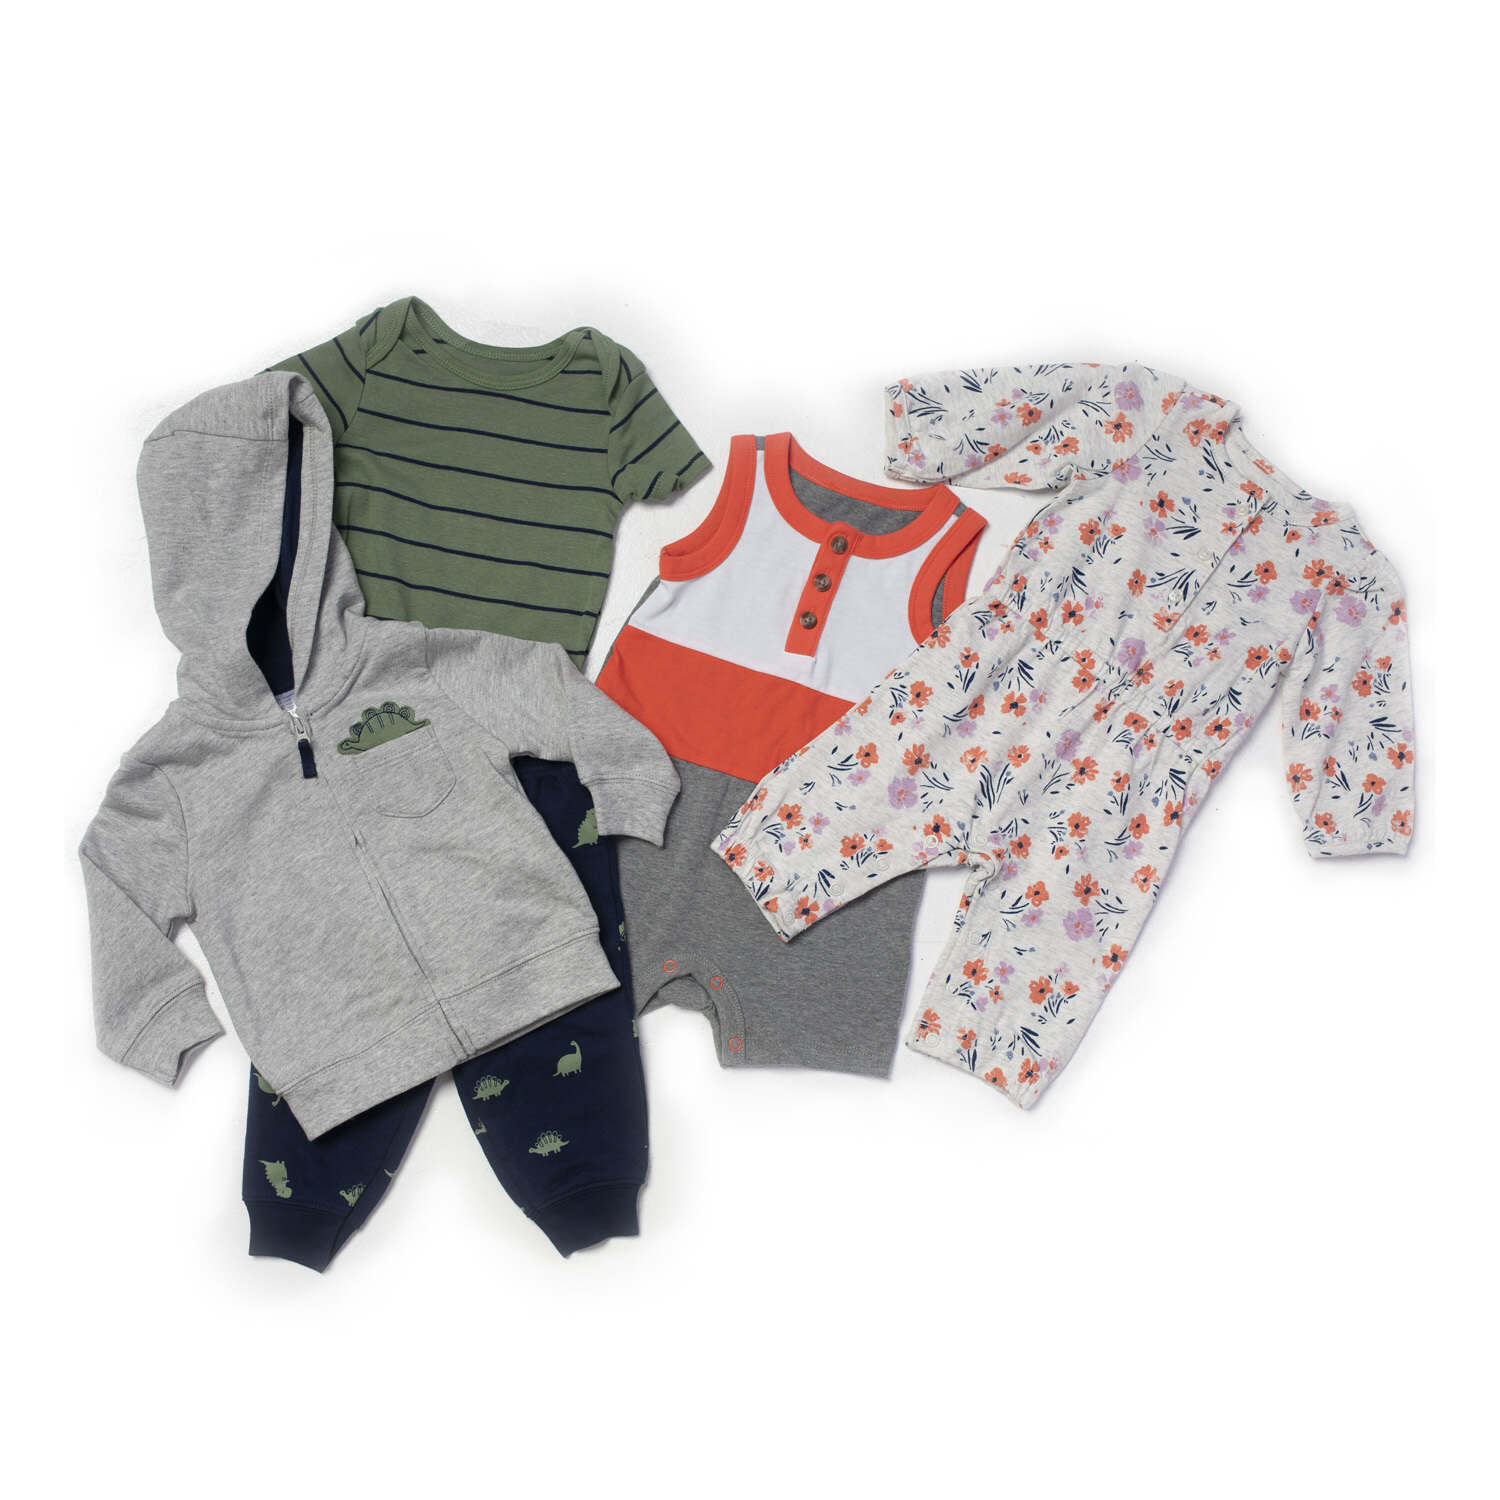 Winter clothes, Babies & Kids, Babies & Kids Fashion on Carousell